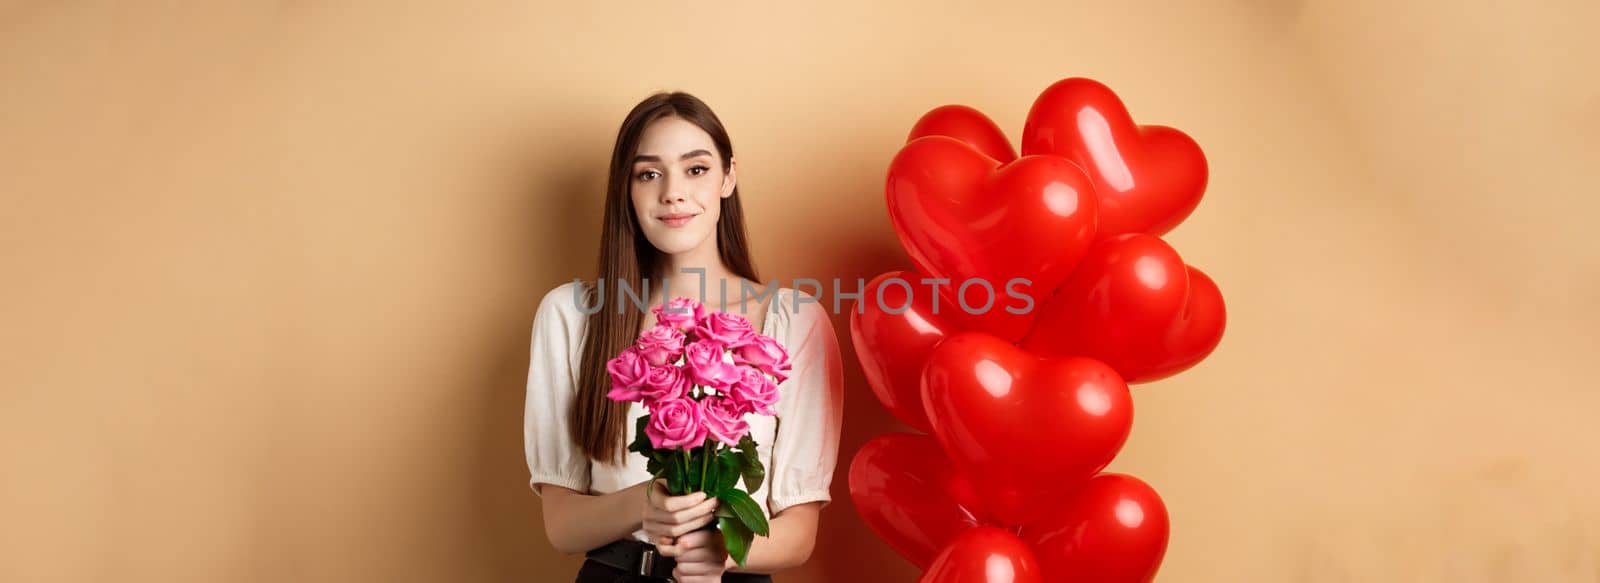 Beautiful girl holding bouquet of pink roses and smiling at camera, going on romantic date, standing near valentines heart balloons, beige background by Benzoix